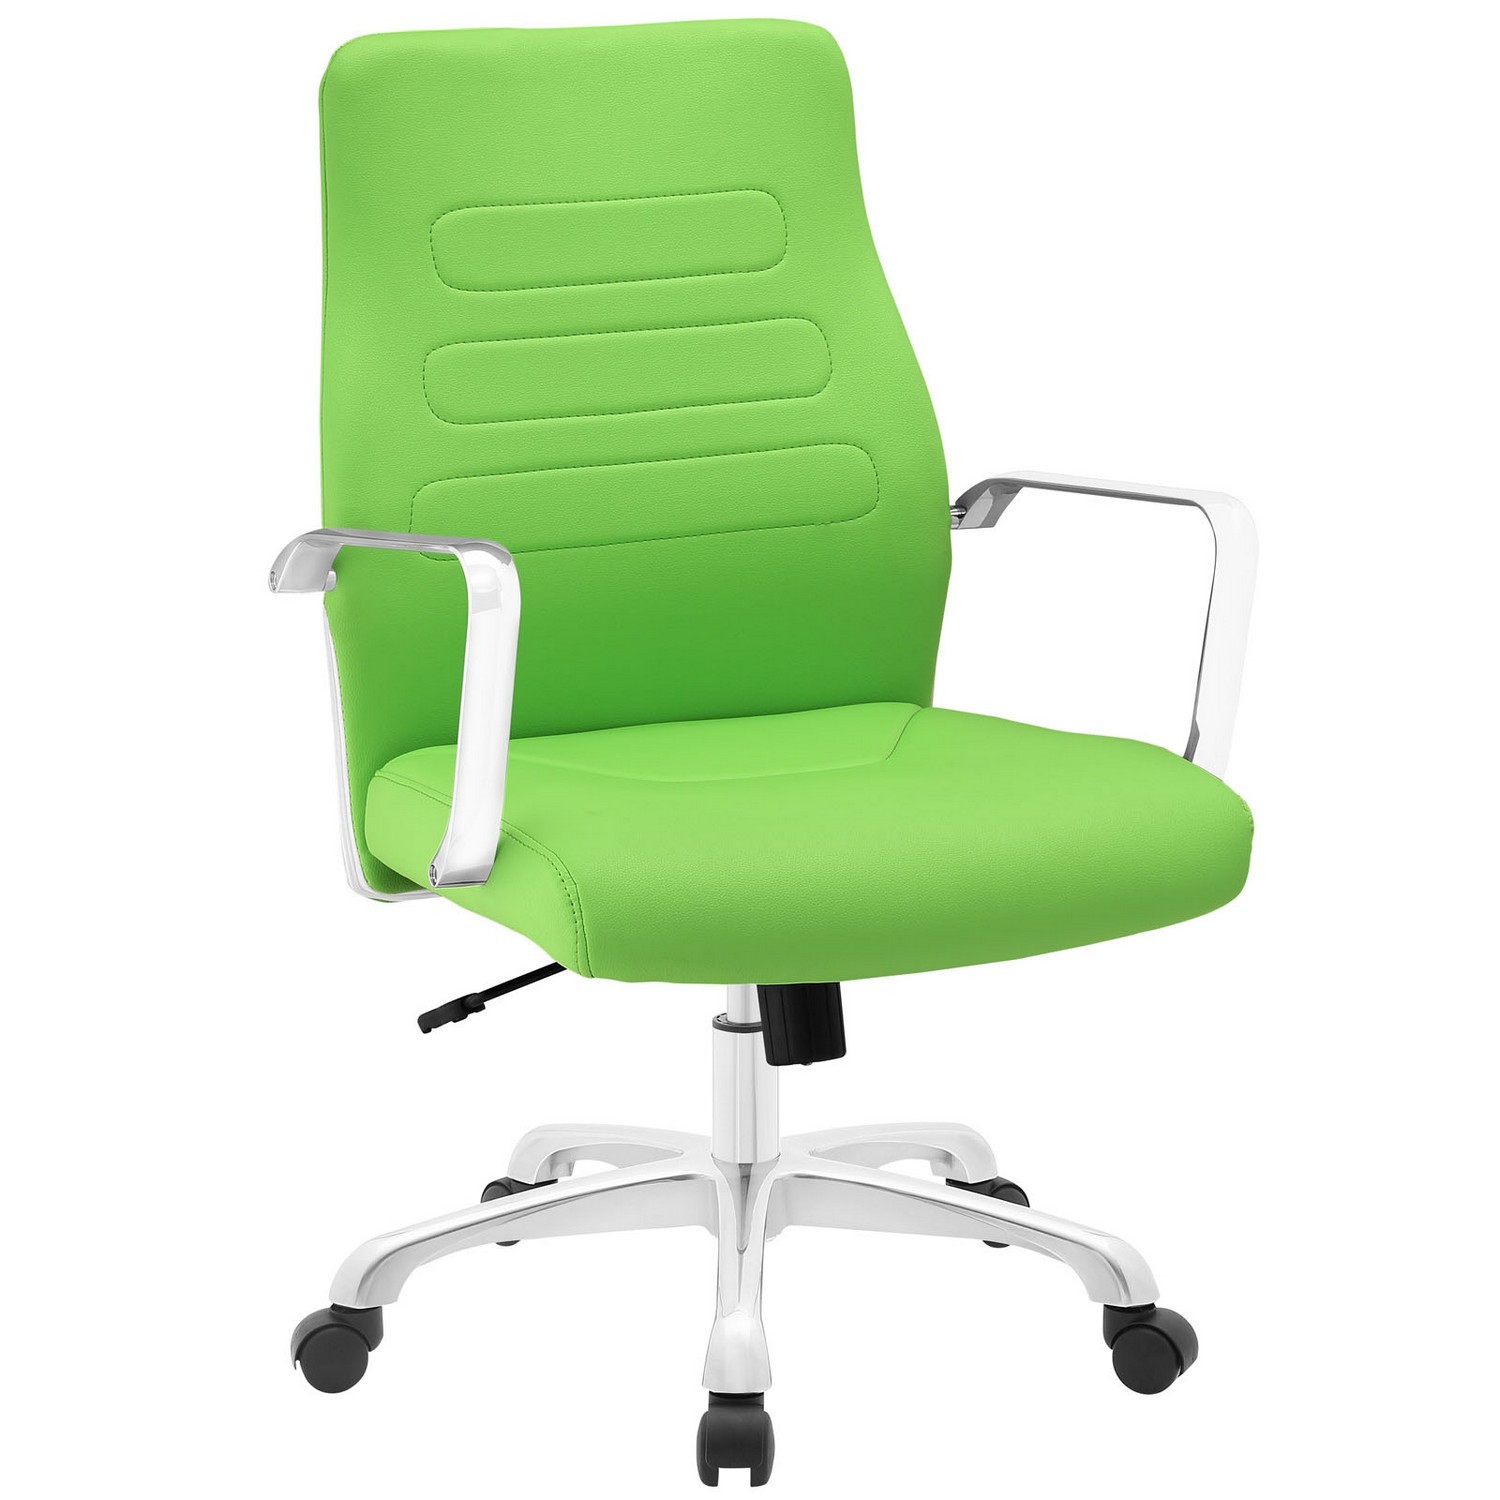 Modway Depict Mid Back Aluminum Office Chair - Bright Green